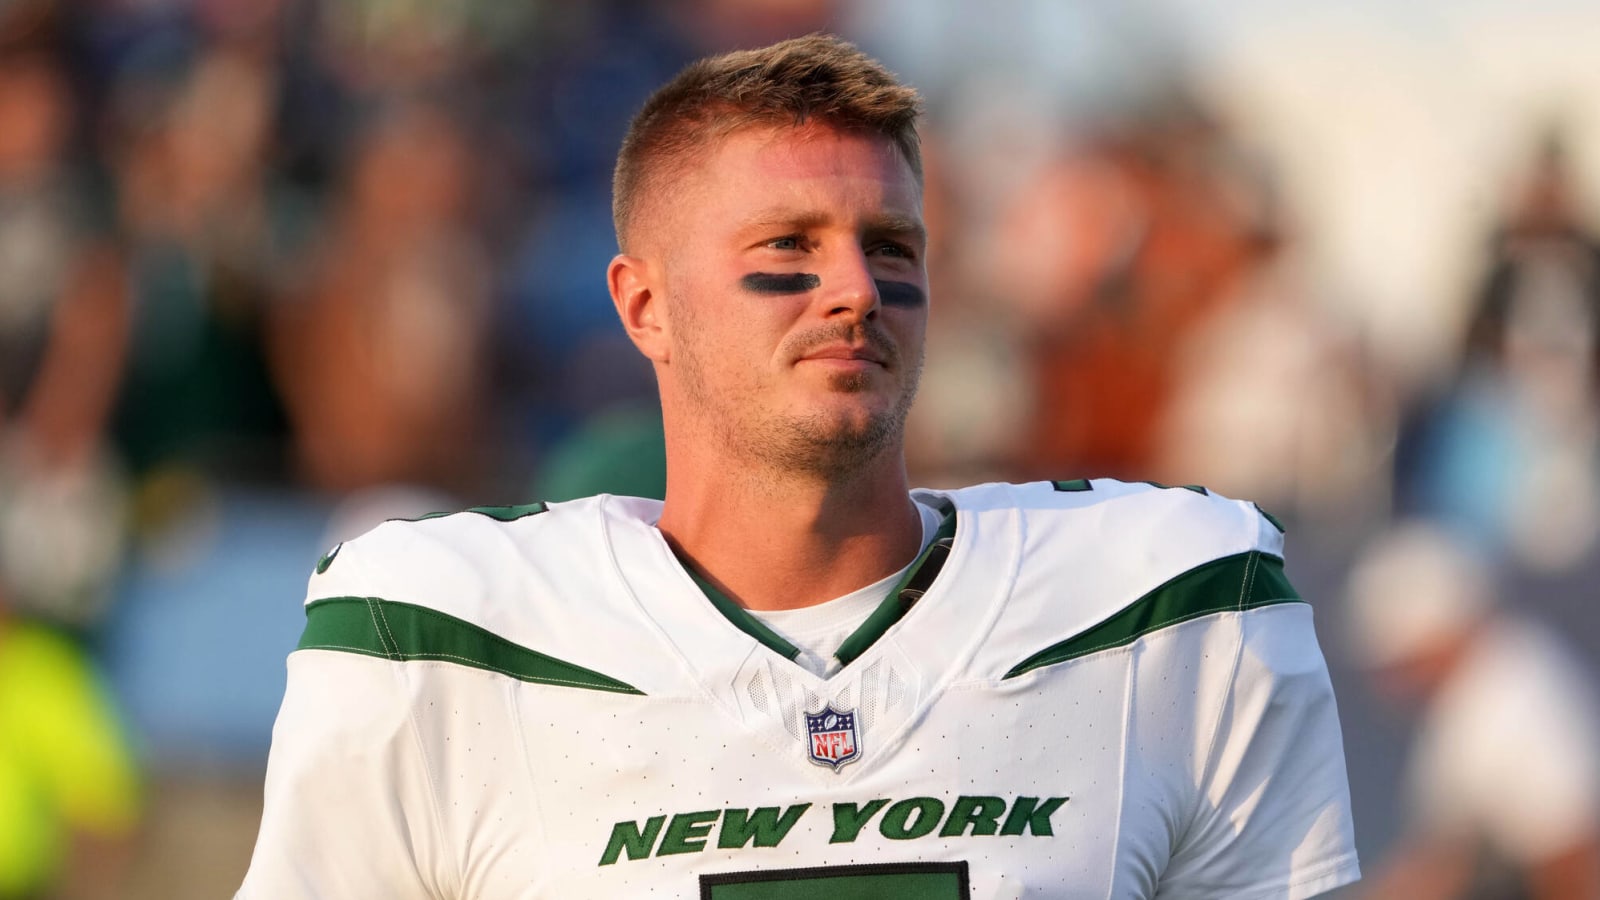 Jets add Boyle to Active Roster, Elevate two From Practice Squad